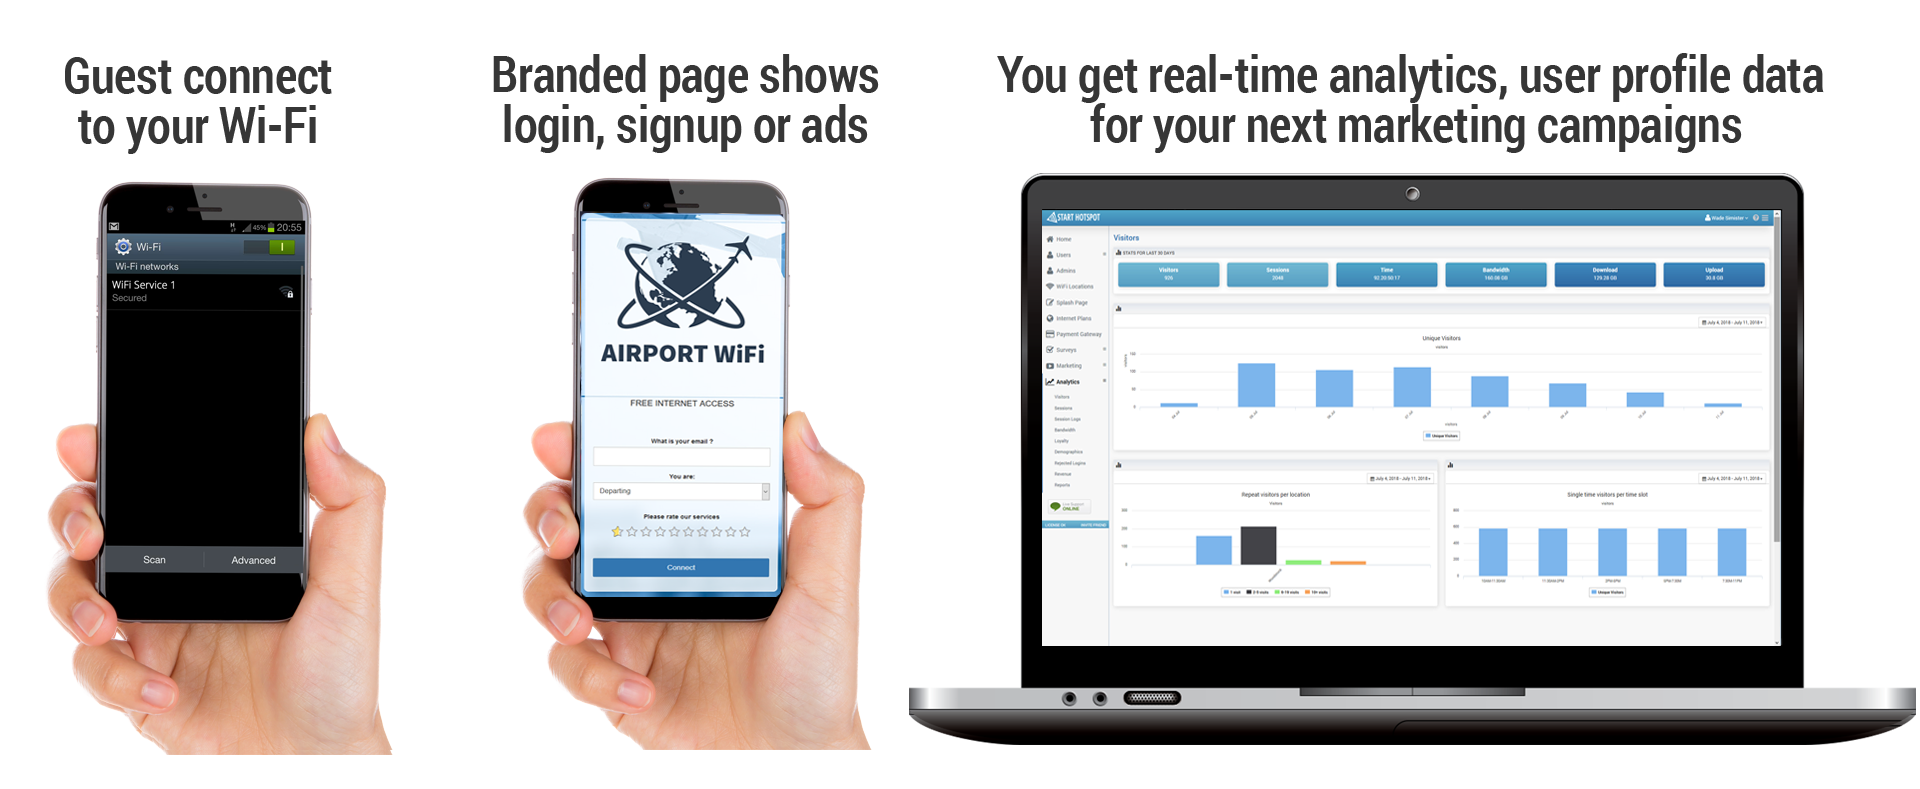 airport extreame connect to wifi jotspot